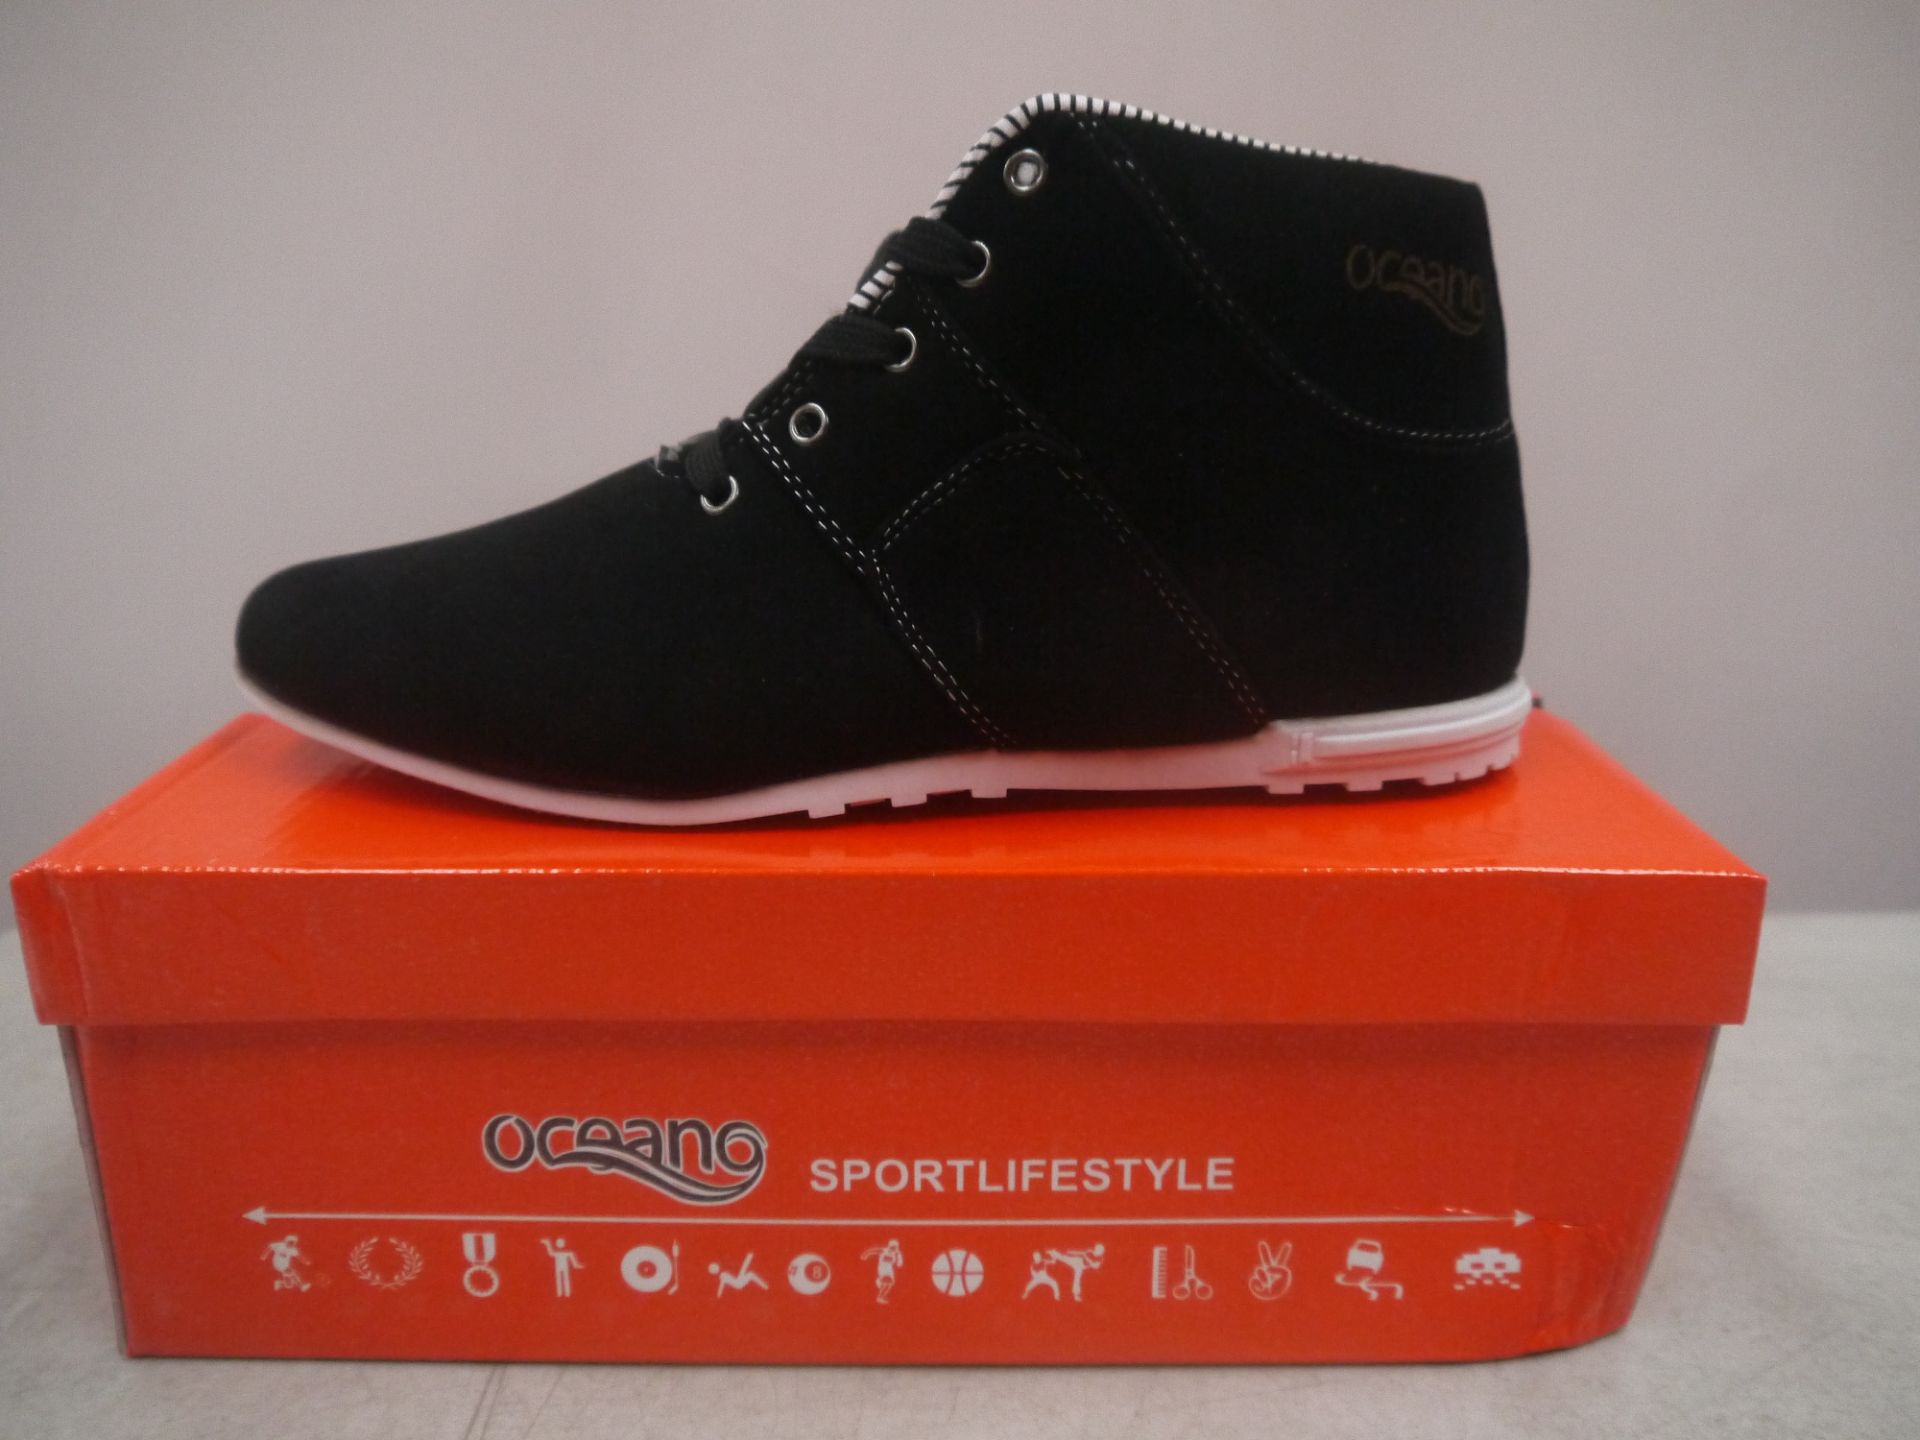 Mens Oceano Trainer Boot black suede style size 44,brand new and boxed